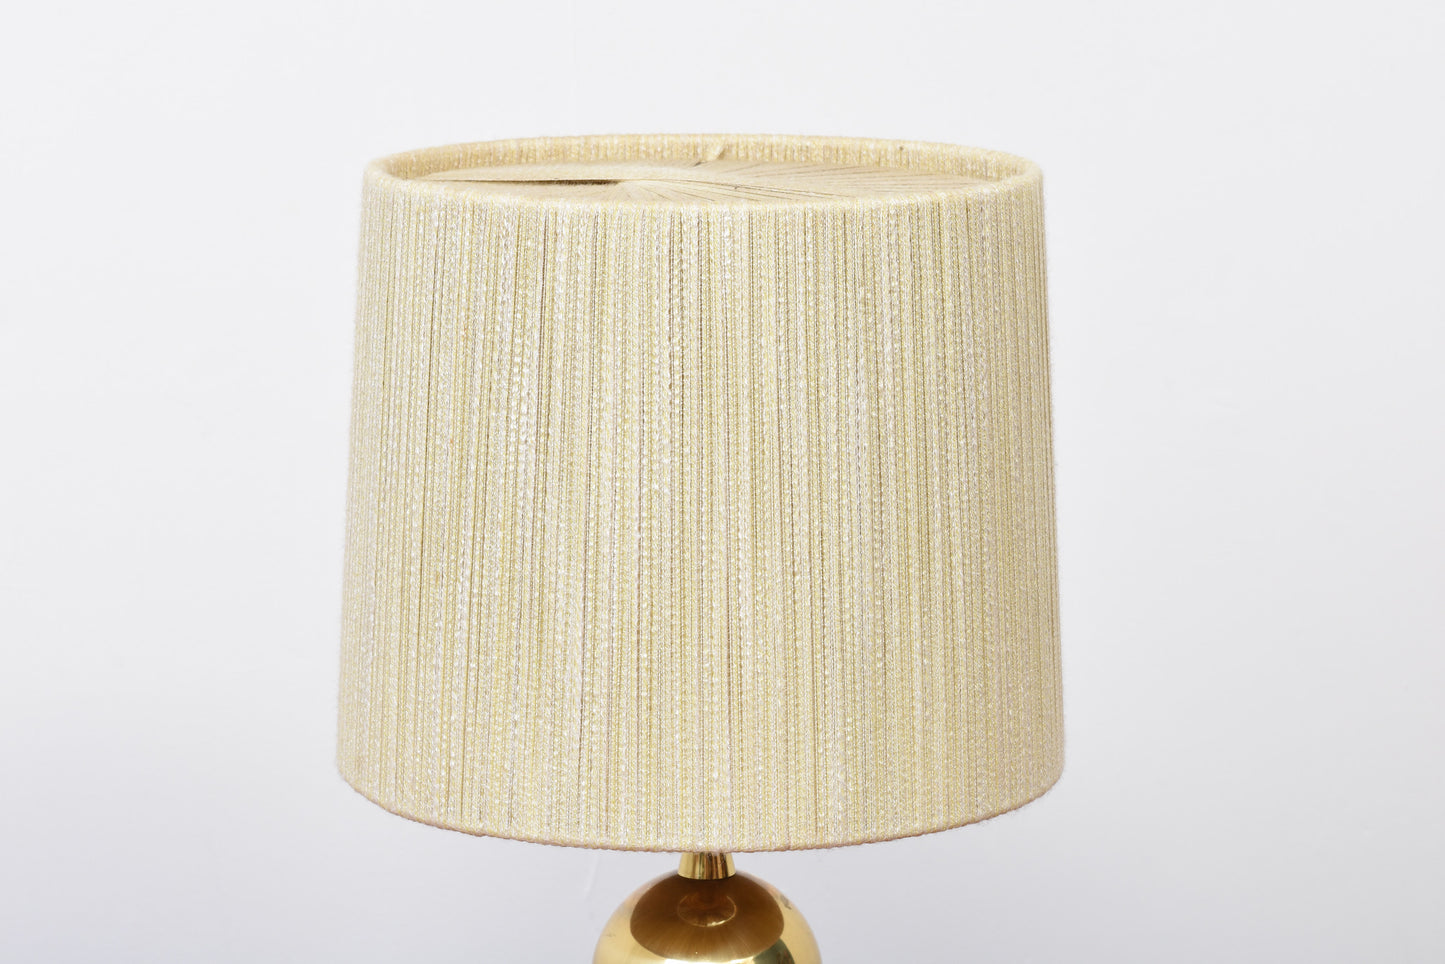 1960s brass table lamp with shade